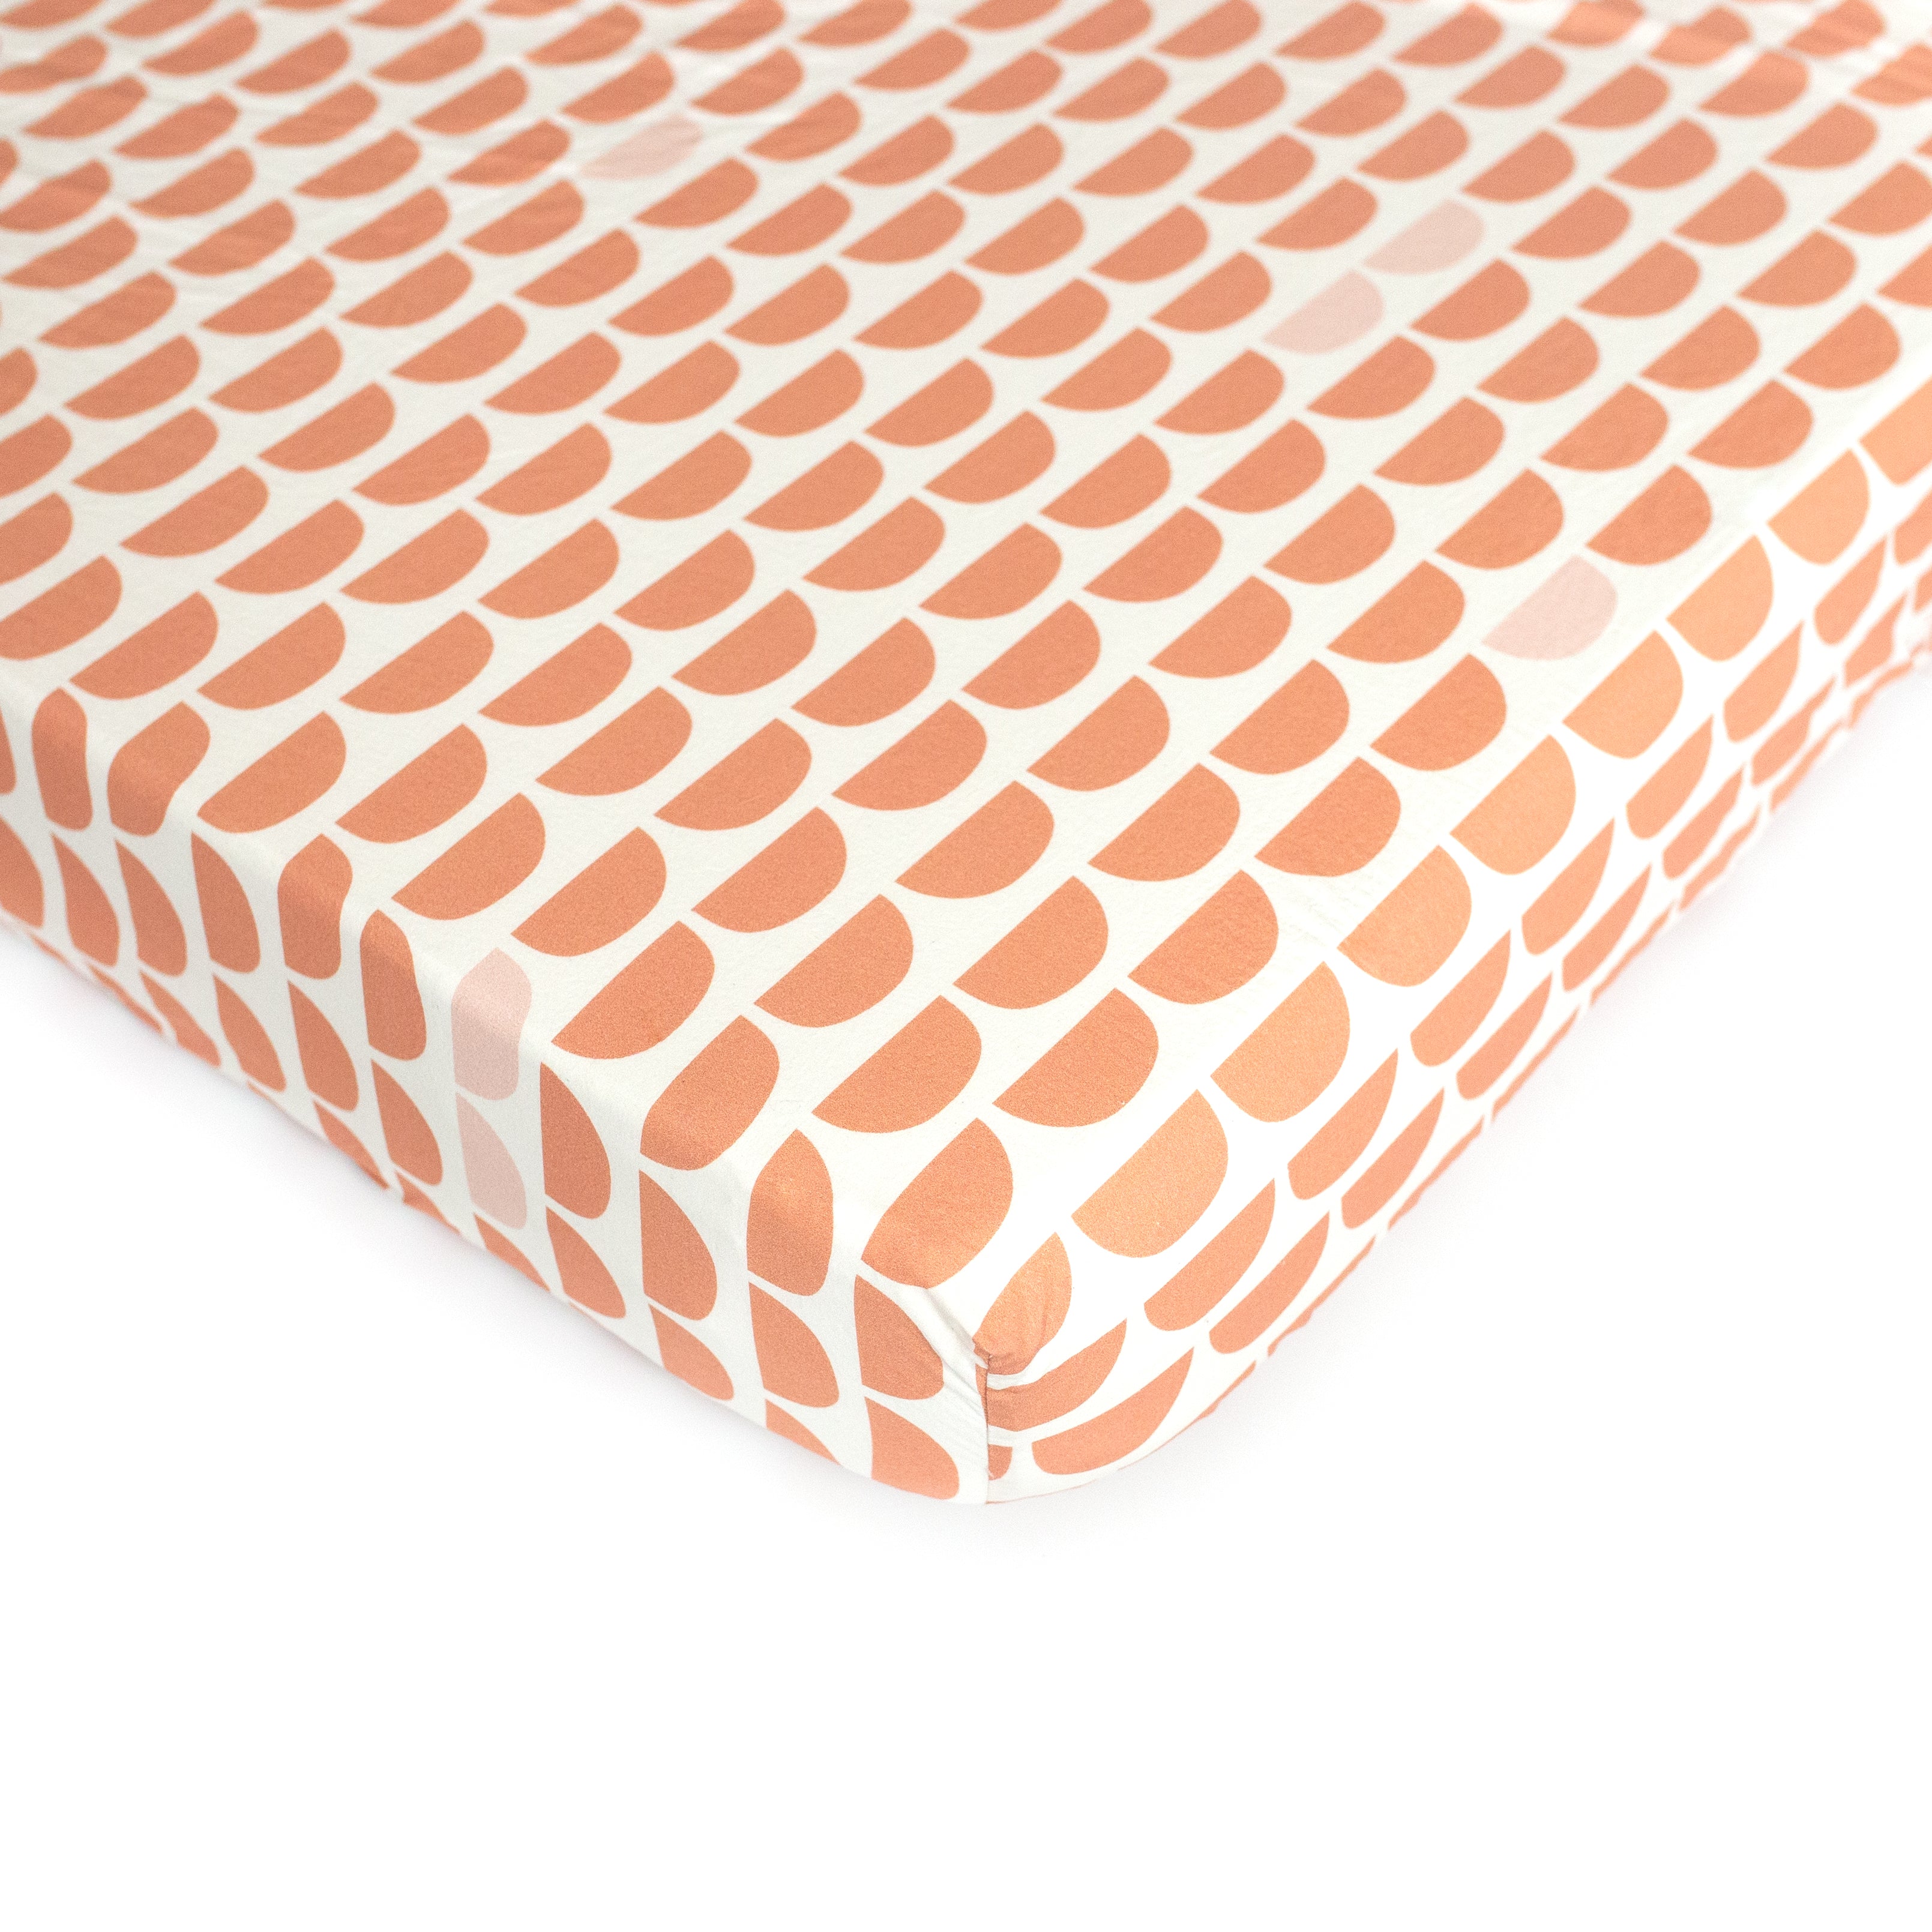 An Oolie organic cotton crib sheet with the red hills print, a natural color with a series of repeating red semicircles.